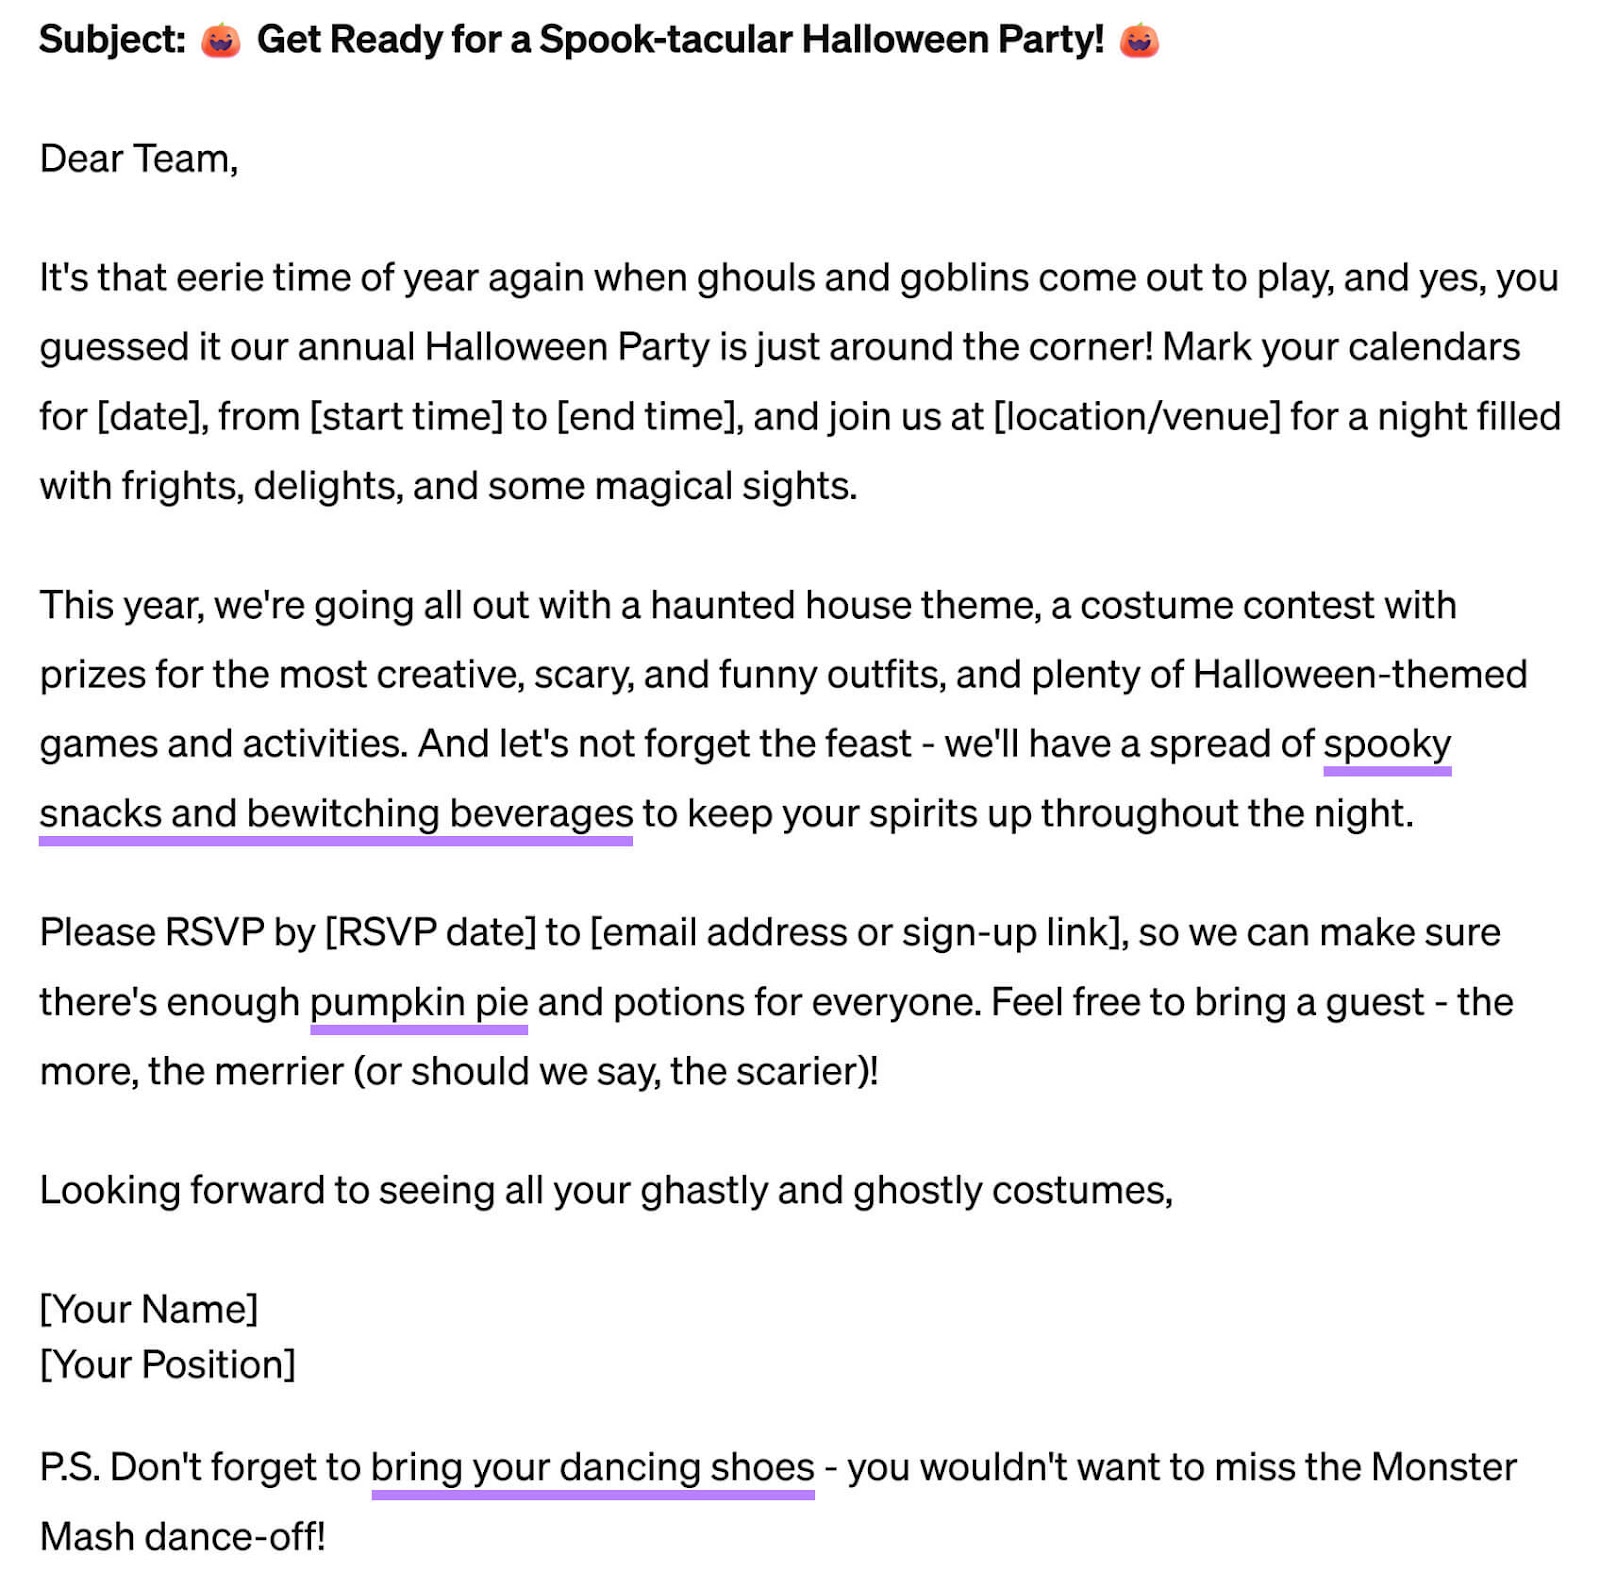 ChatGPT-generated email announcement astir  the bureau   Halloween party